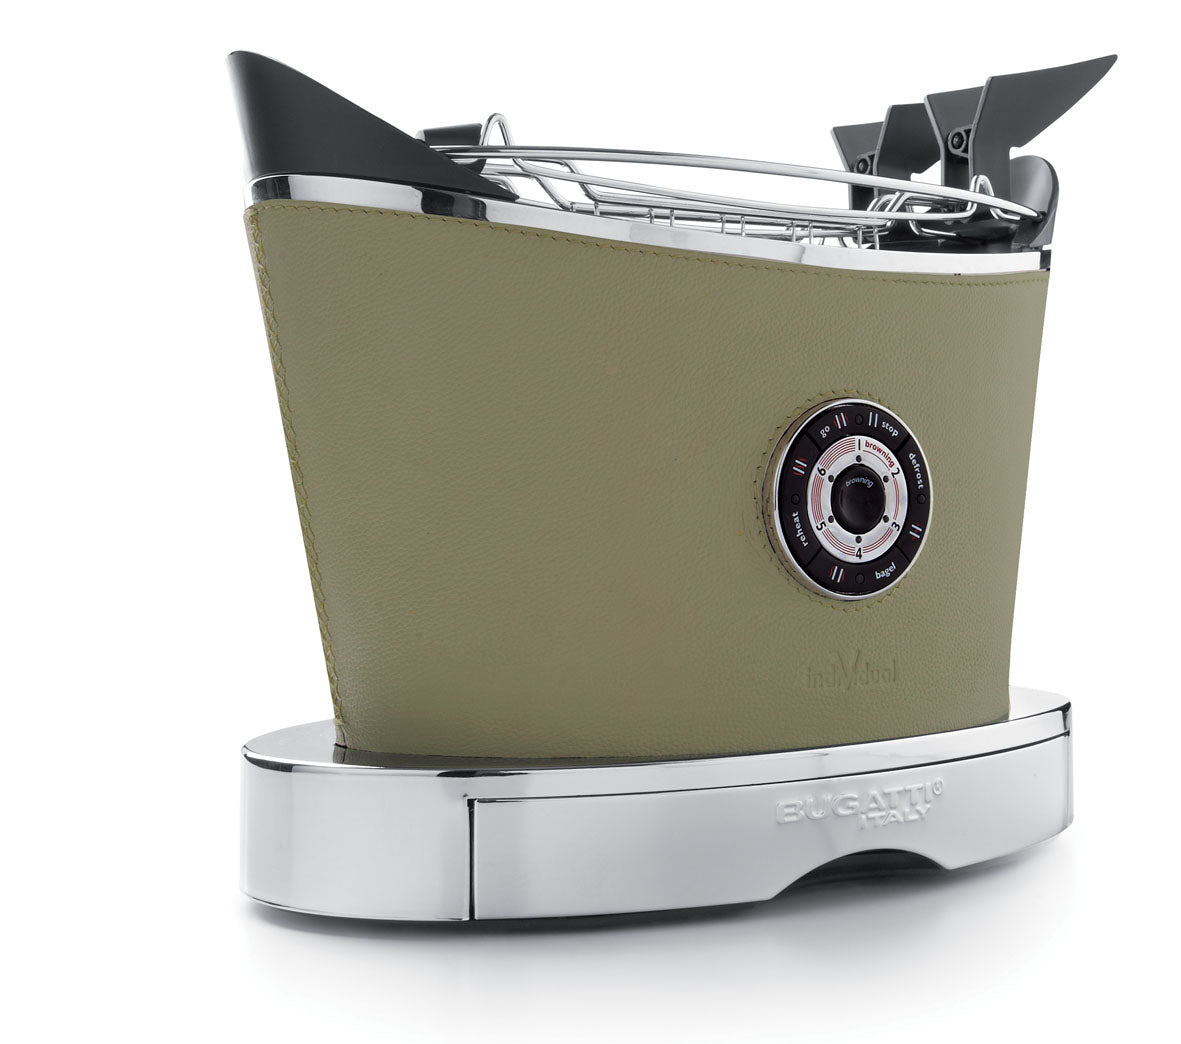 BUGATTI Volo Electric Toaster in Steel with Melange Leather Upholstery